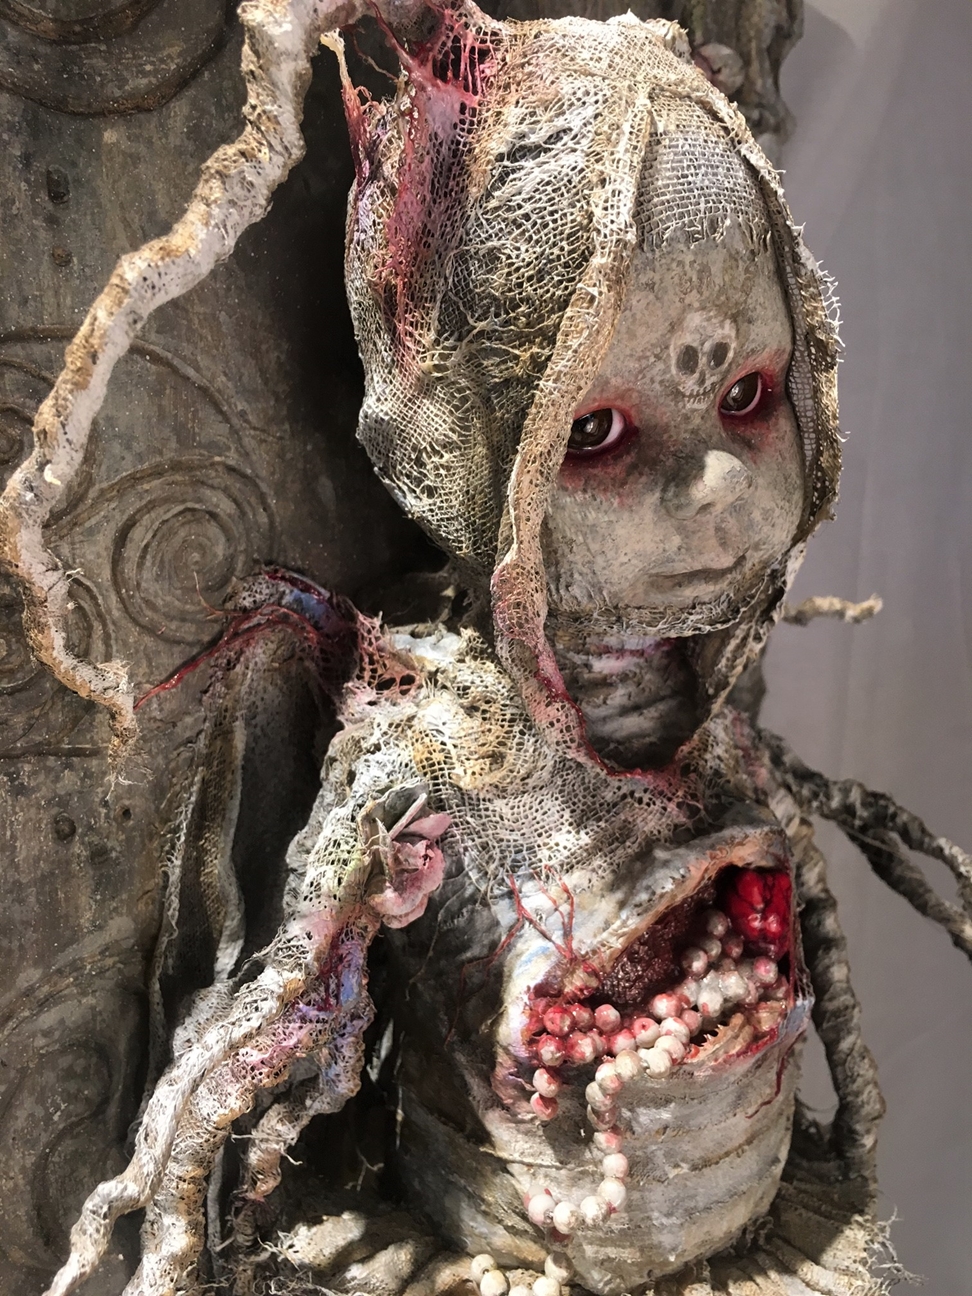 close up dark art mixed media assemblage sculpture of a macabre baby made with porcelain, bone & rope